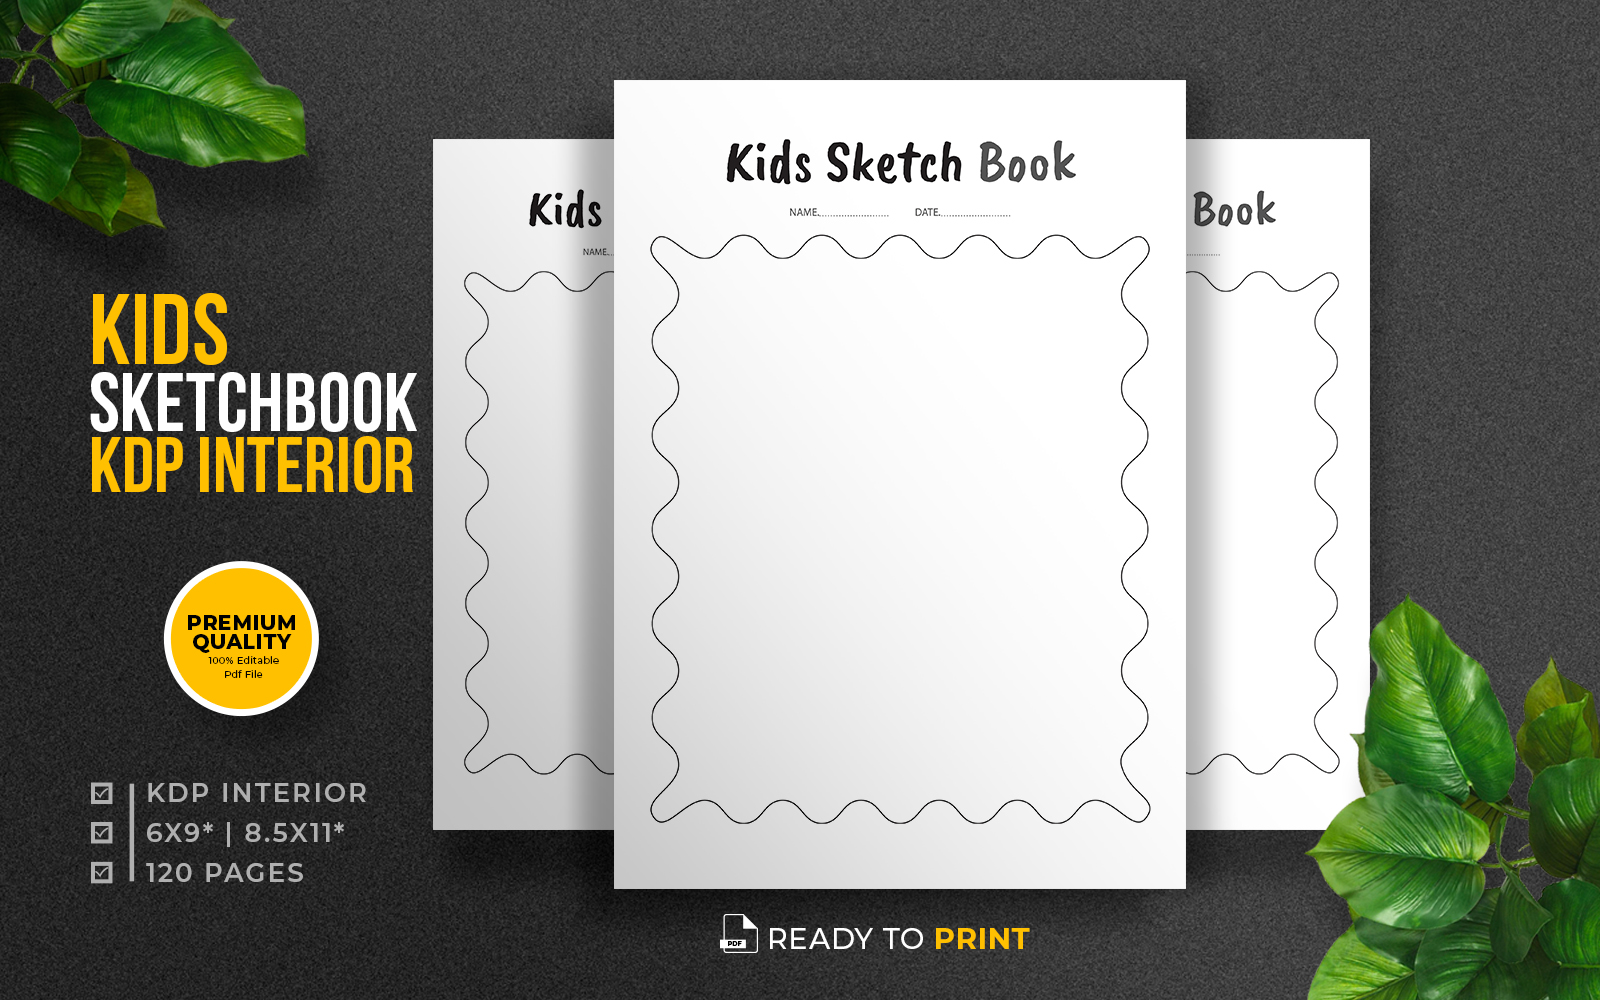 Kids Sketchbook  KDP Interior Template Graphic by Educare